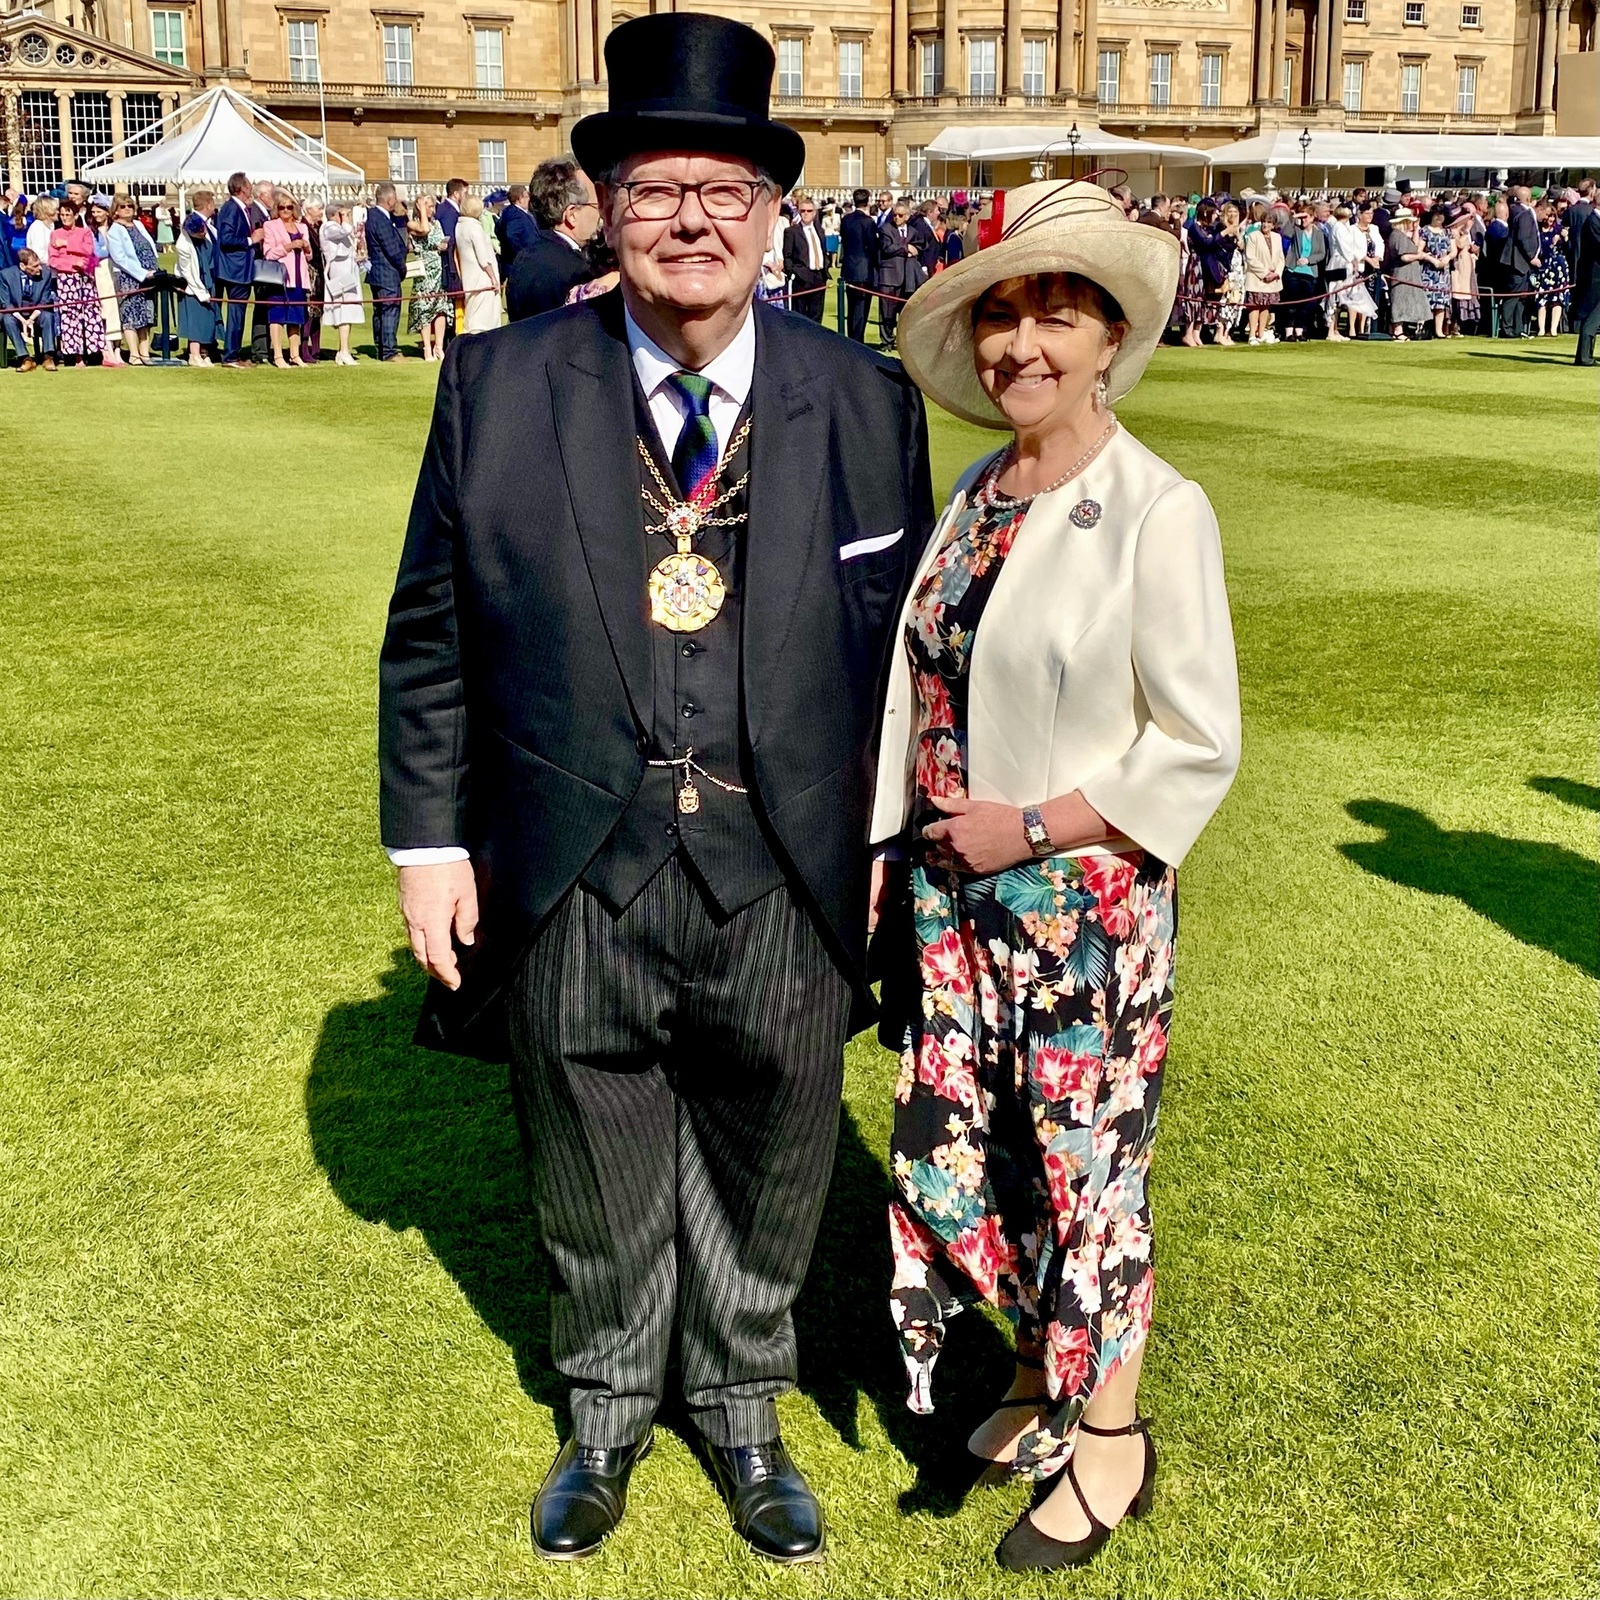 3 May 2023 - Privileged to be invited to The Royal Garden Party at Buckingham Palace alongside so many impressive volunteers and high achievers